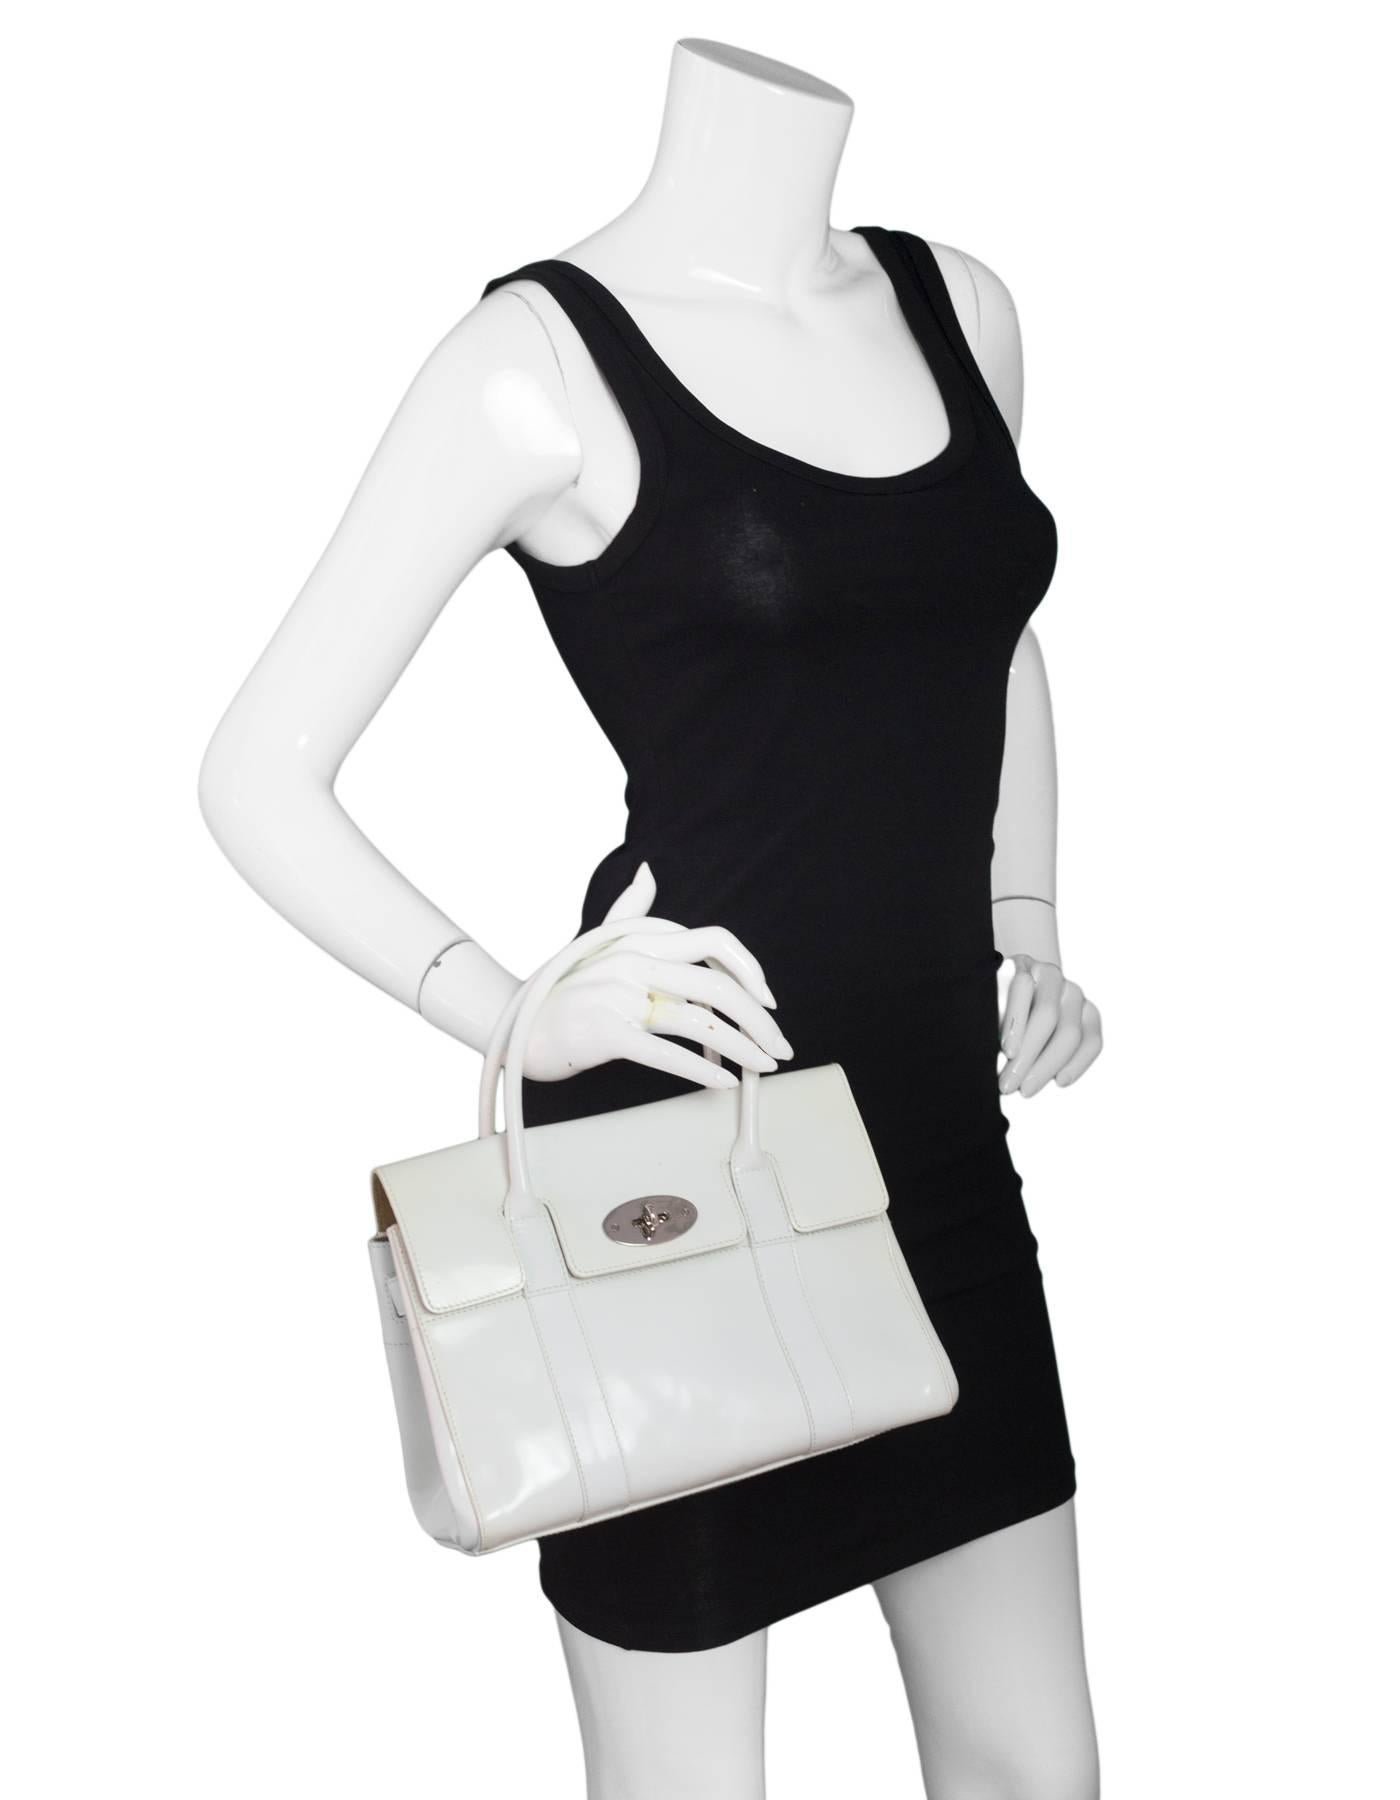 Mulberry White Patent Leather Small Bayswater Bag

Color: White
Hardware: Silvertone
Materials: Patent leather
Lining: Beige textile
Closure/Opening: Flap top with center twist lock
Exterior Pockets: None
Interior Pockets: Zip wall pocket, wall